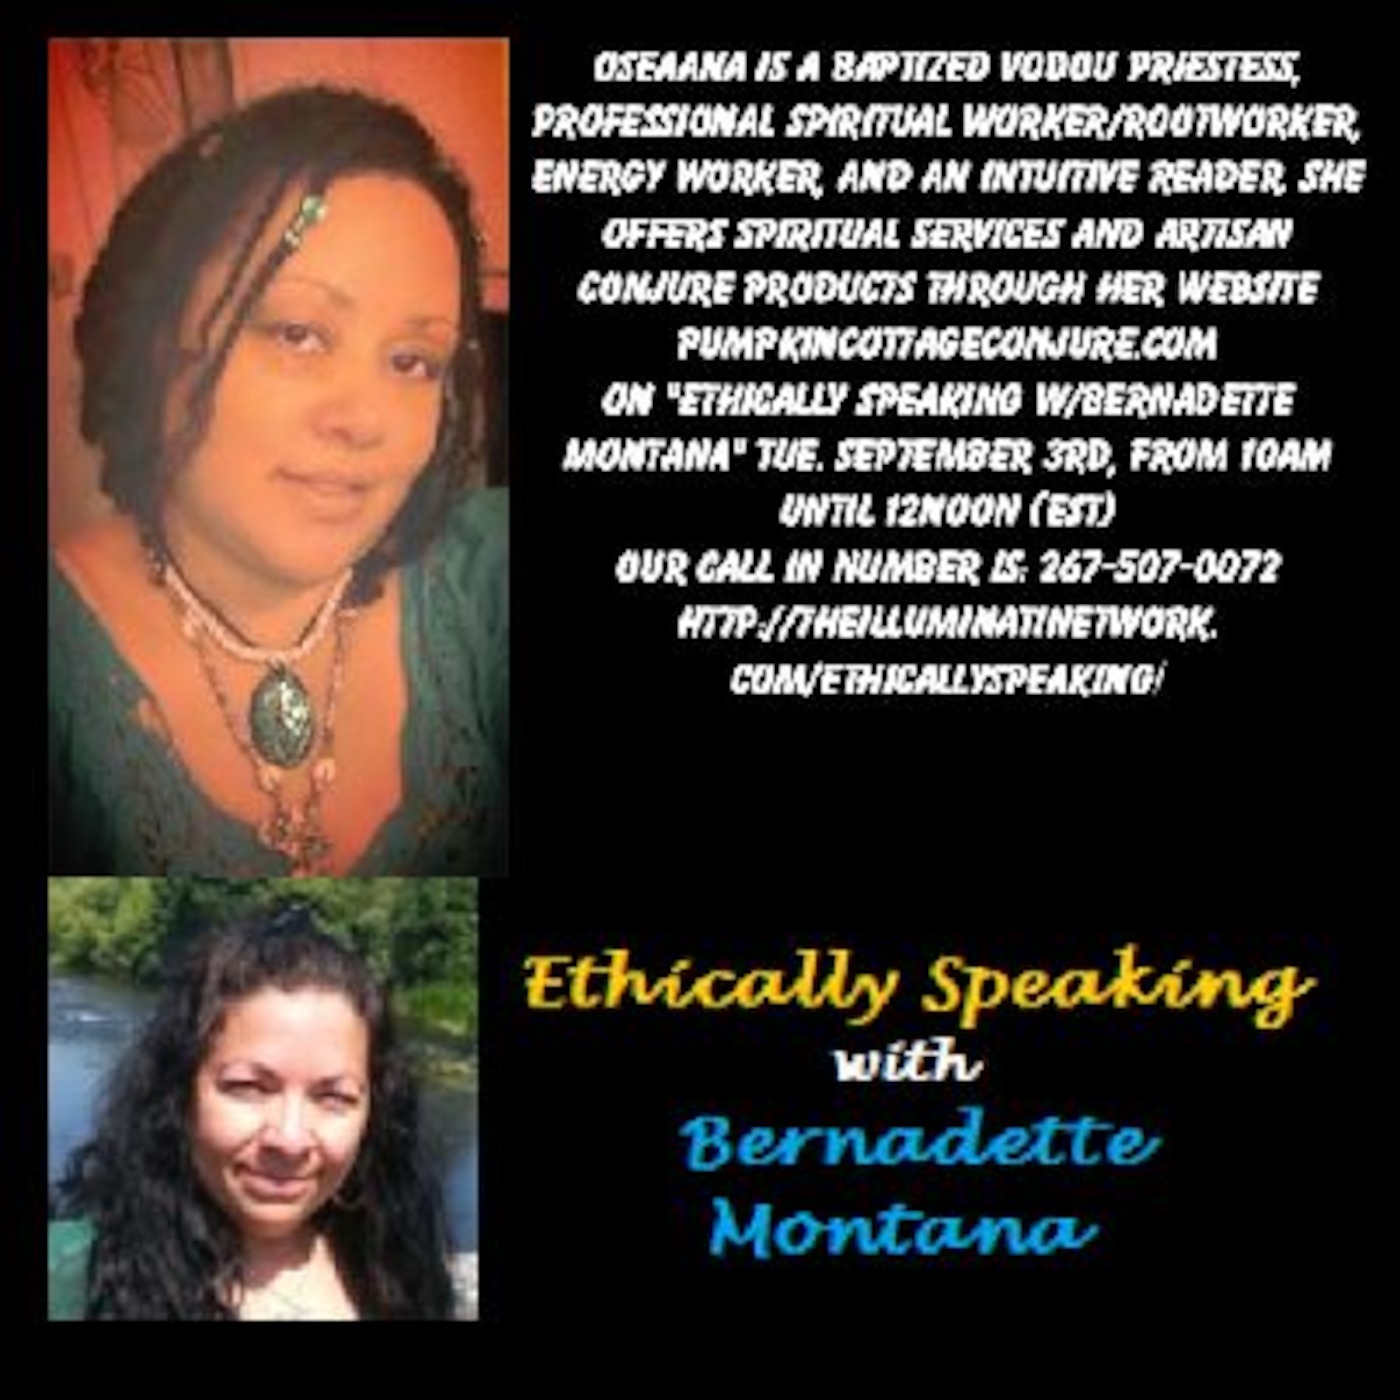 Ethically Speaking with Oseaana December